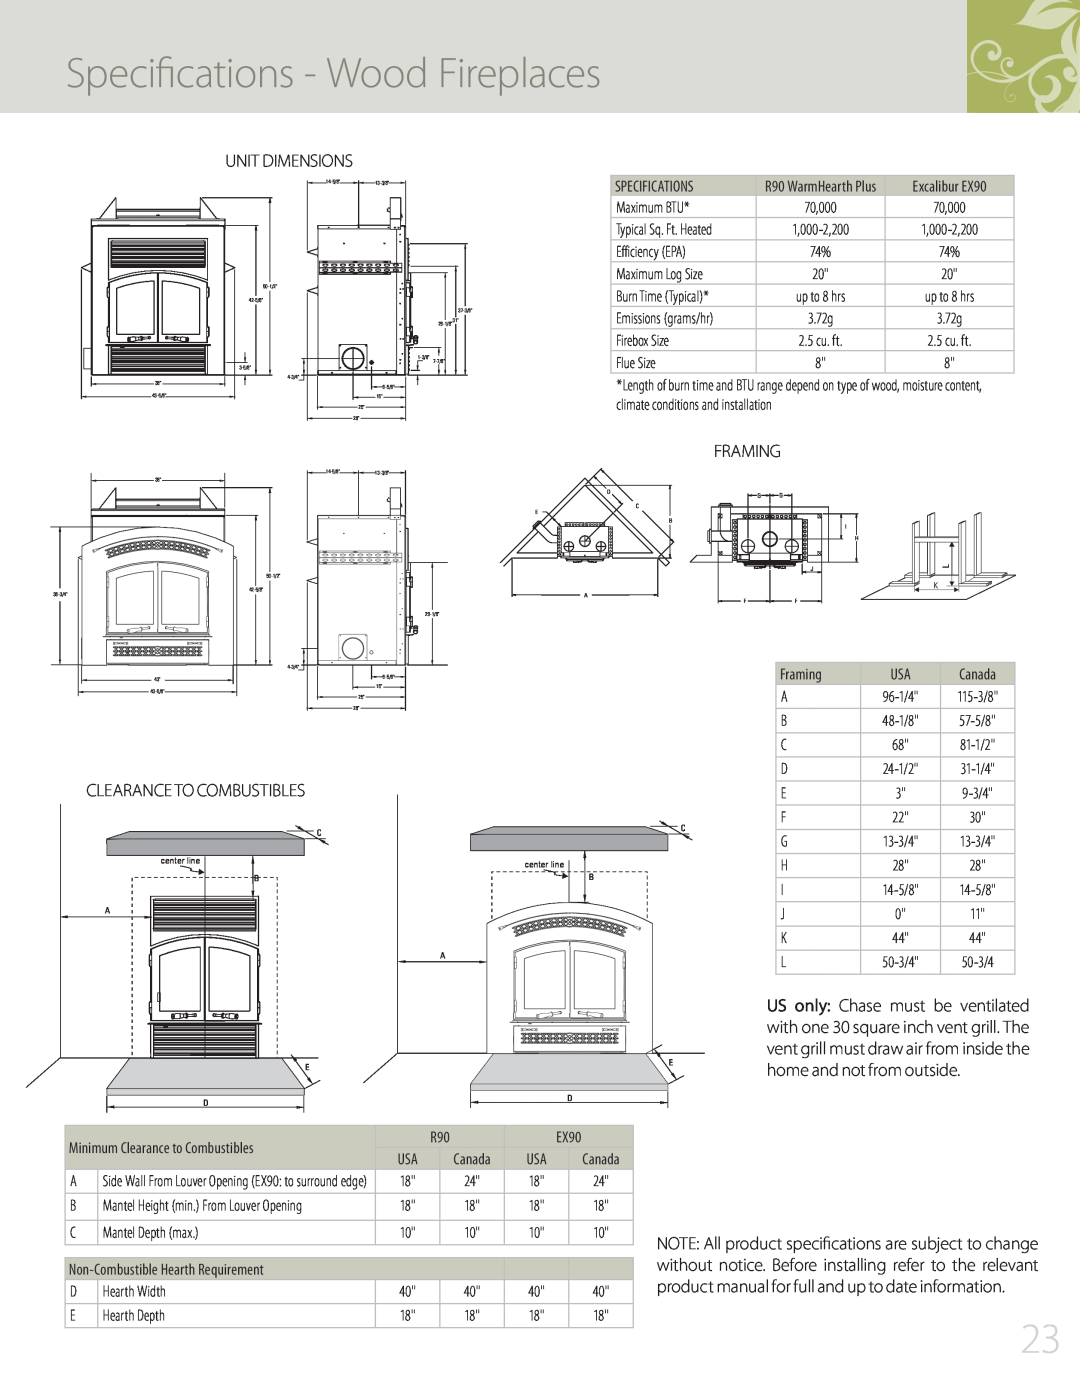 Regency F2400, S2400 manual Specifications - Wood Fireplaces, Unit Dimensions, Framing, Clearance To Combustibles 